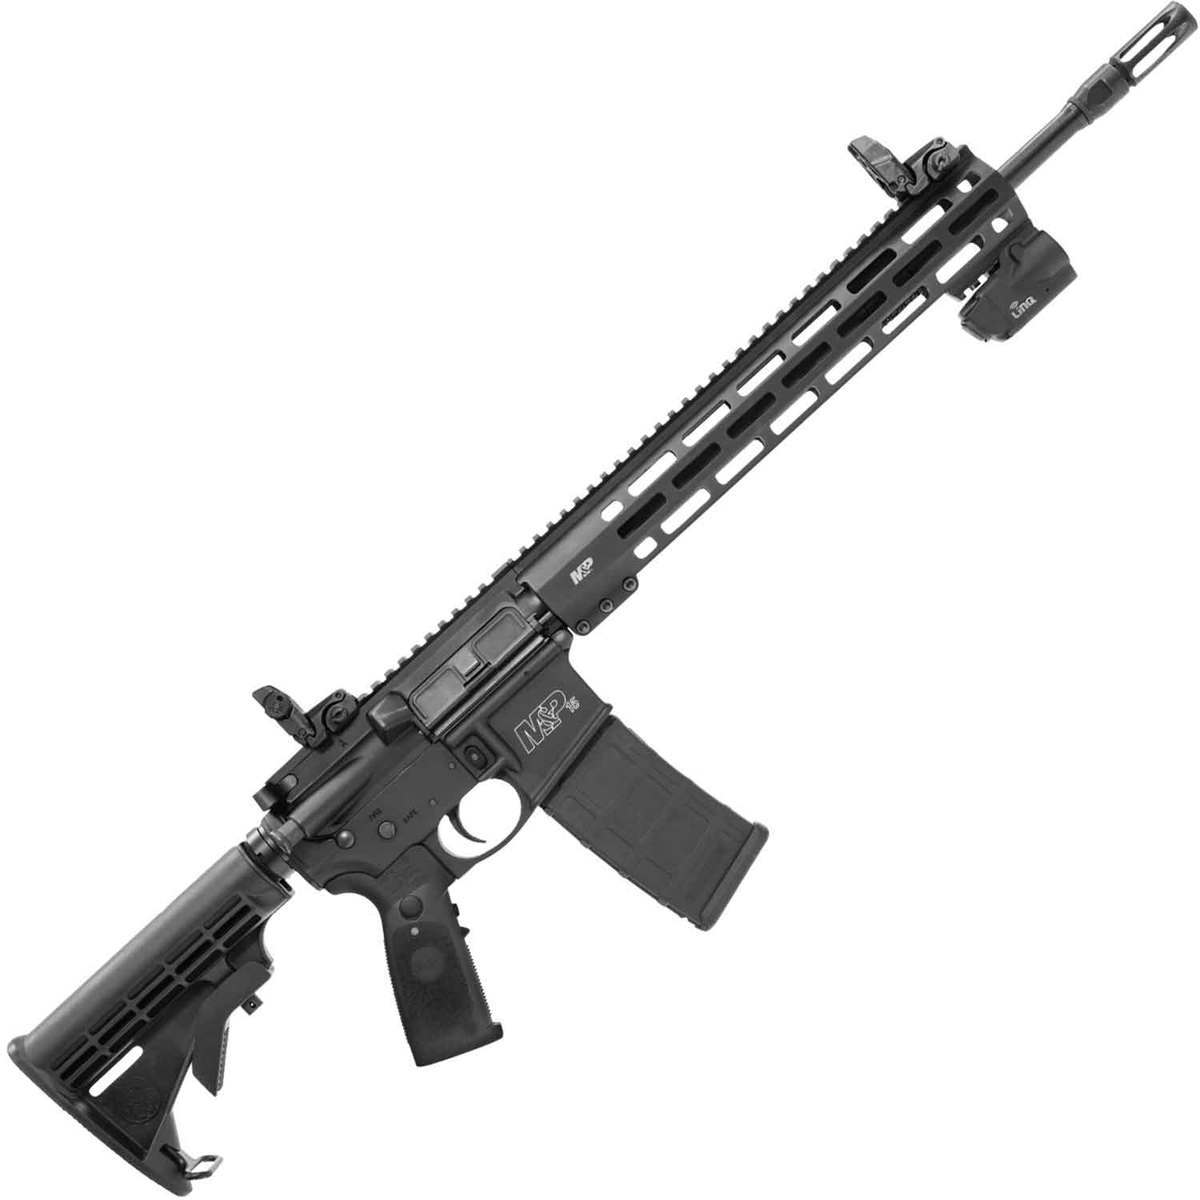 Smith And Wesson Mandp15 Carbine Tactical Rifle Sportsmans Warehouse